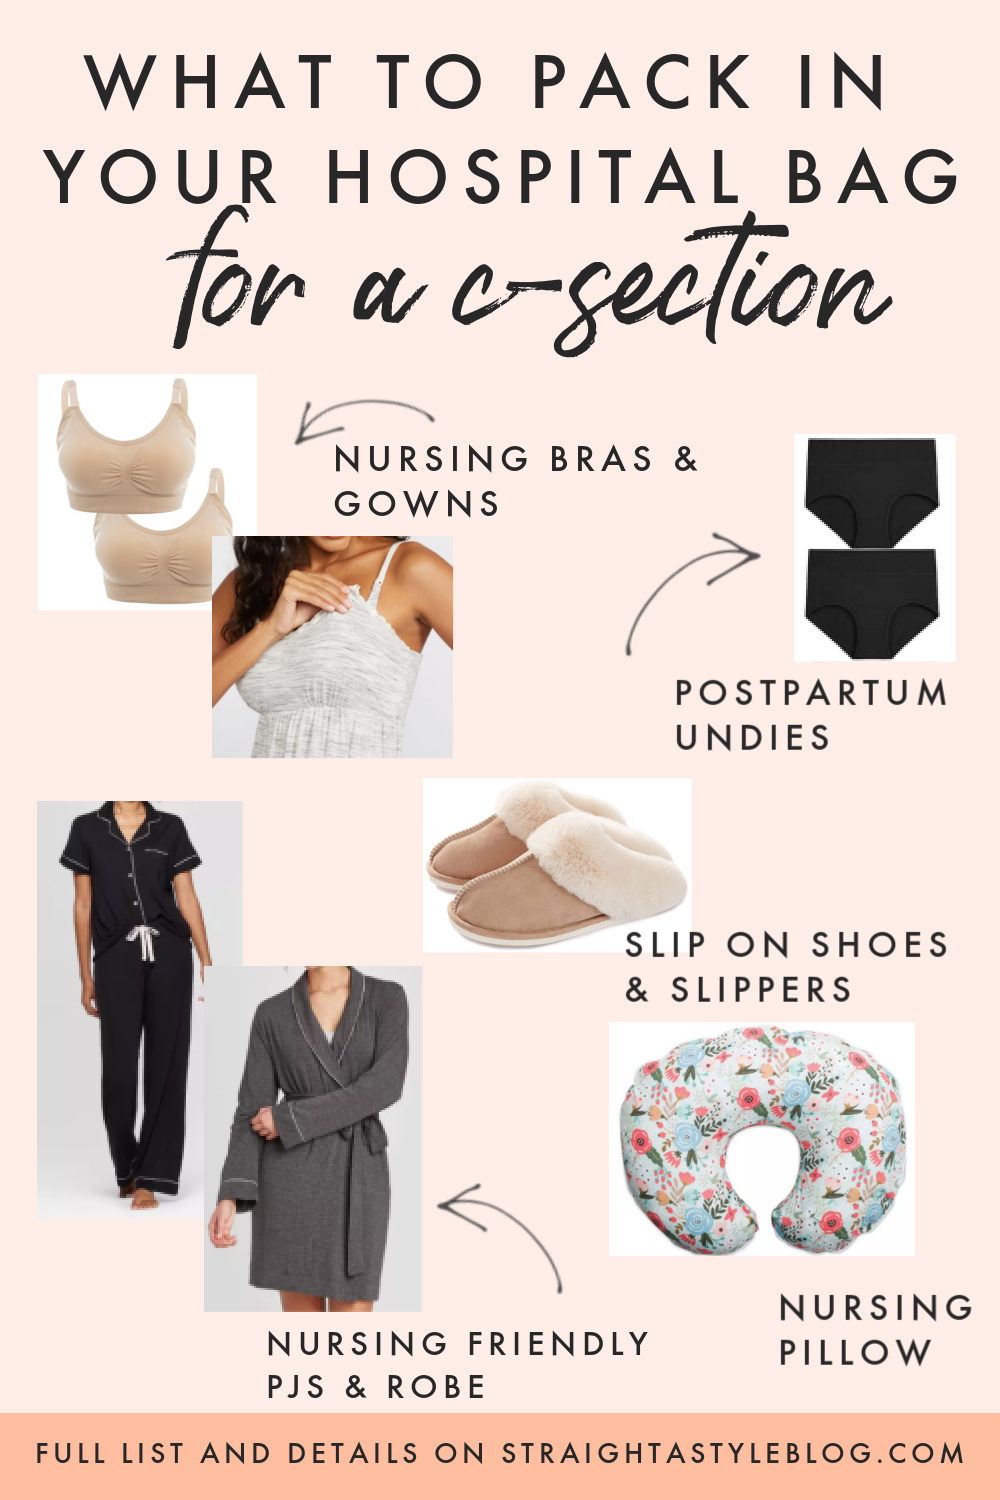 https://www.straightastyleblog.com/wp-content/uploads/2020/07/what-to-pack-in-your-hospital-bag.jpg